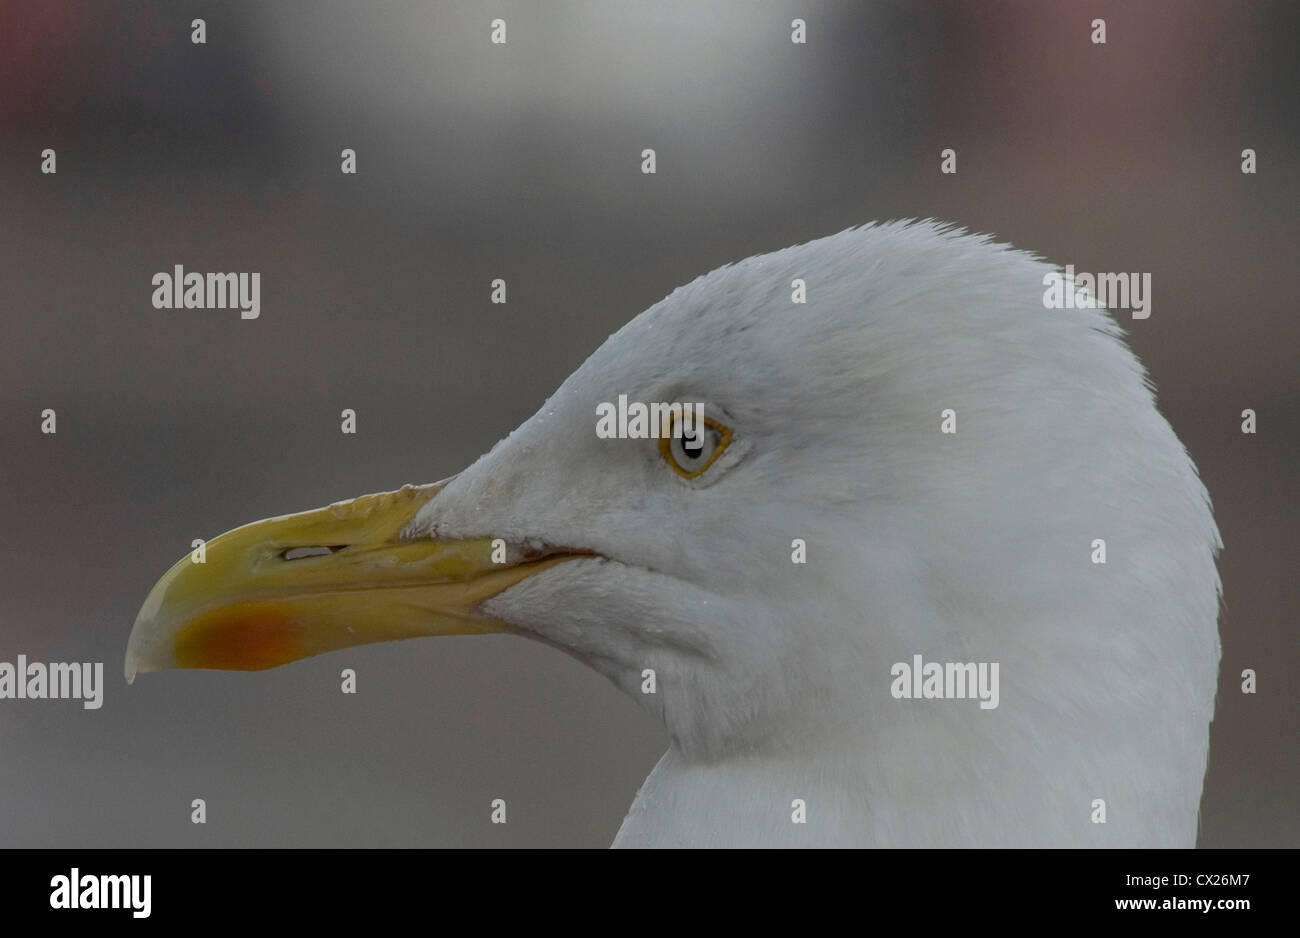 Herring gull, Larus argentatus. Close up of a herring gull's head, showing the red spot on the lower part of its bill Stock Photo